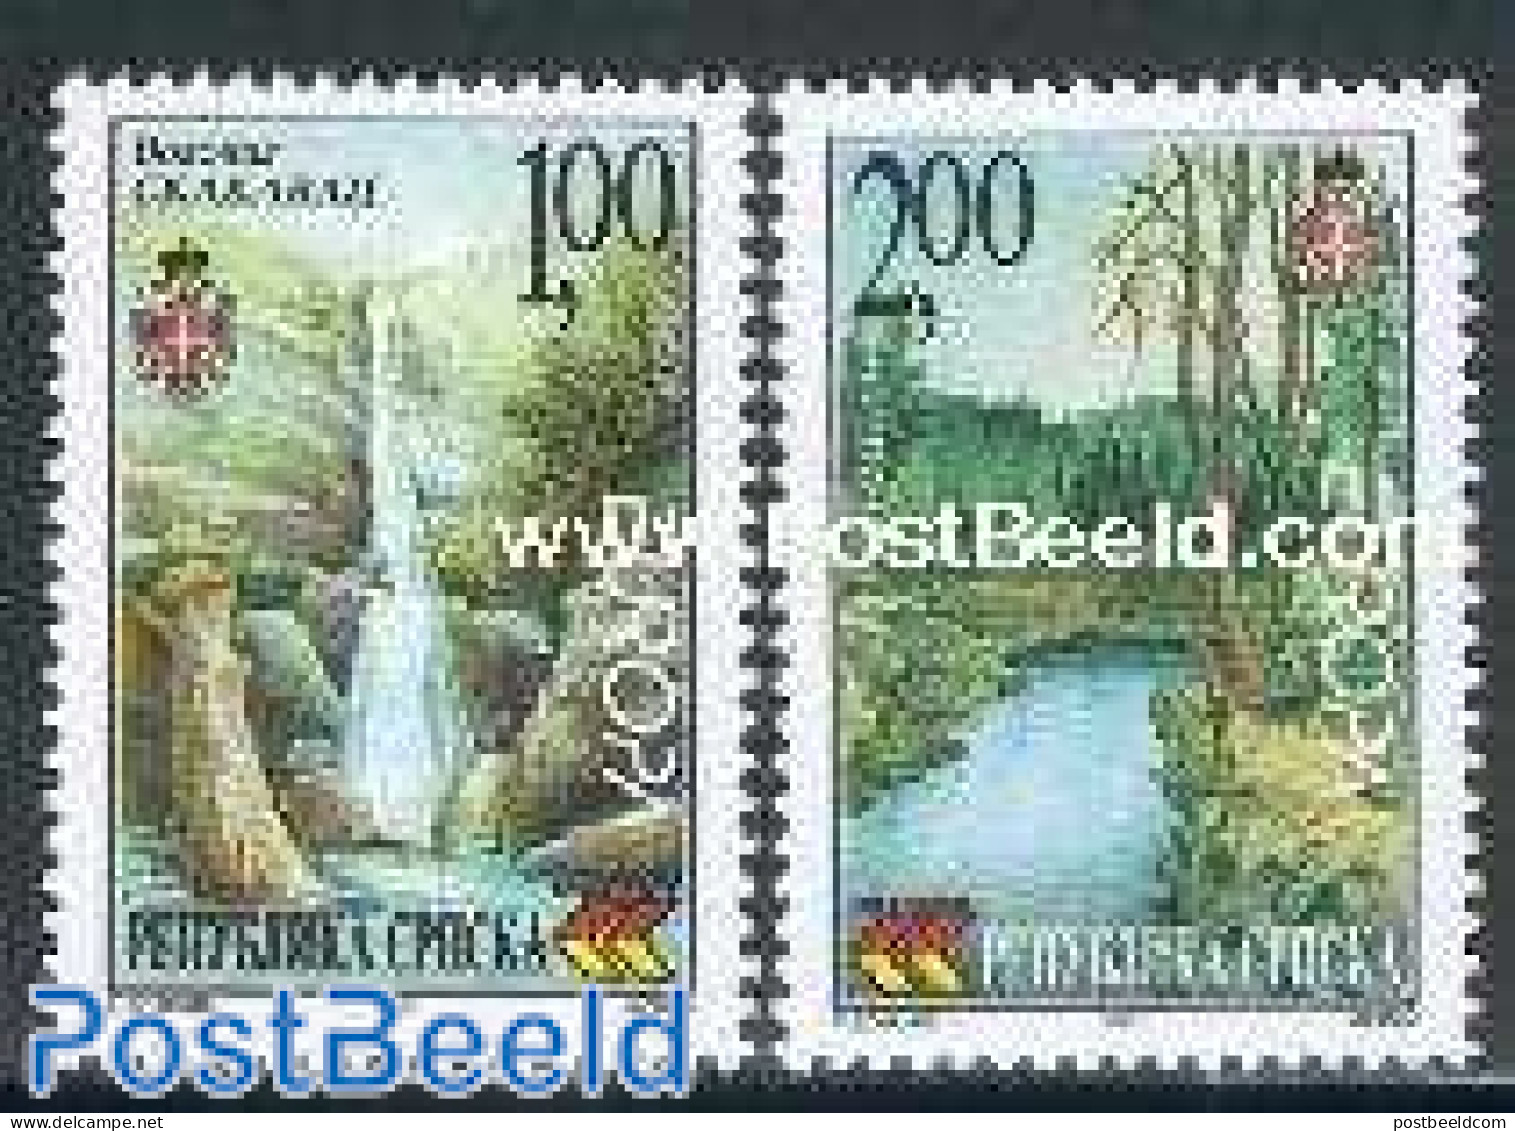 Bosnia Herzegovina - Serbian Adm. 2001 Europa, Water 2v, Mint NH, History - Nature - Europa (cept) - Trees & Forests -.. - Rotary, Lions Club